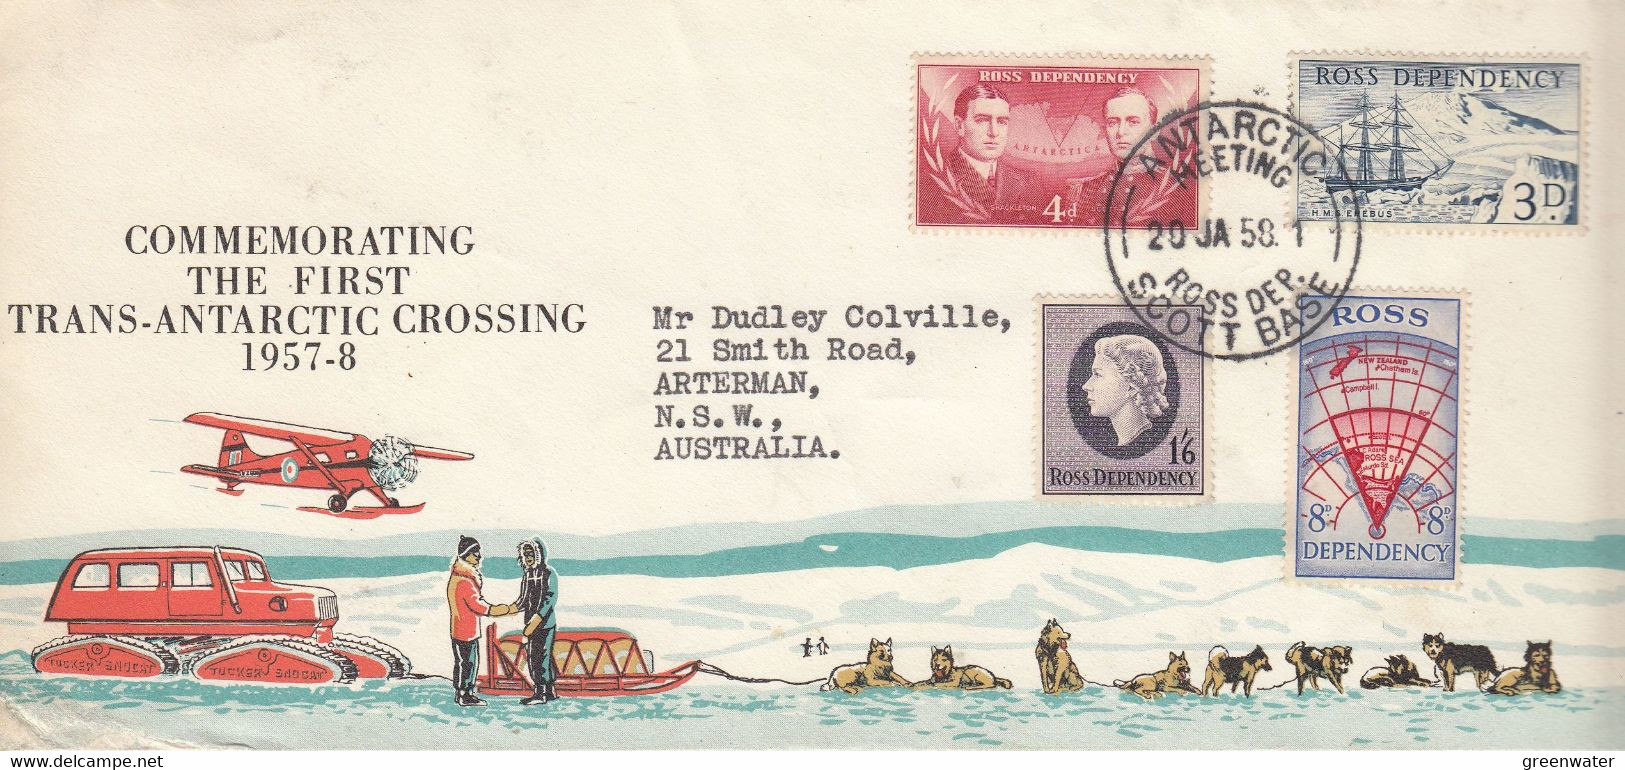 Ross Dependency 1958 Commemorating 1st Trans-Antarctic Crossing Cover Ca Scott Base 20 JA 58 (ROF170) - Covers & Documents